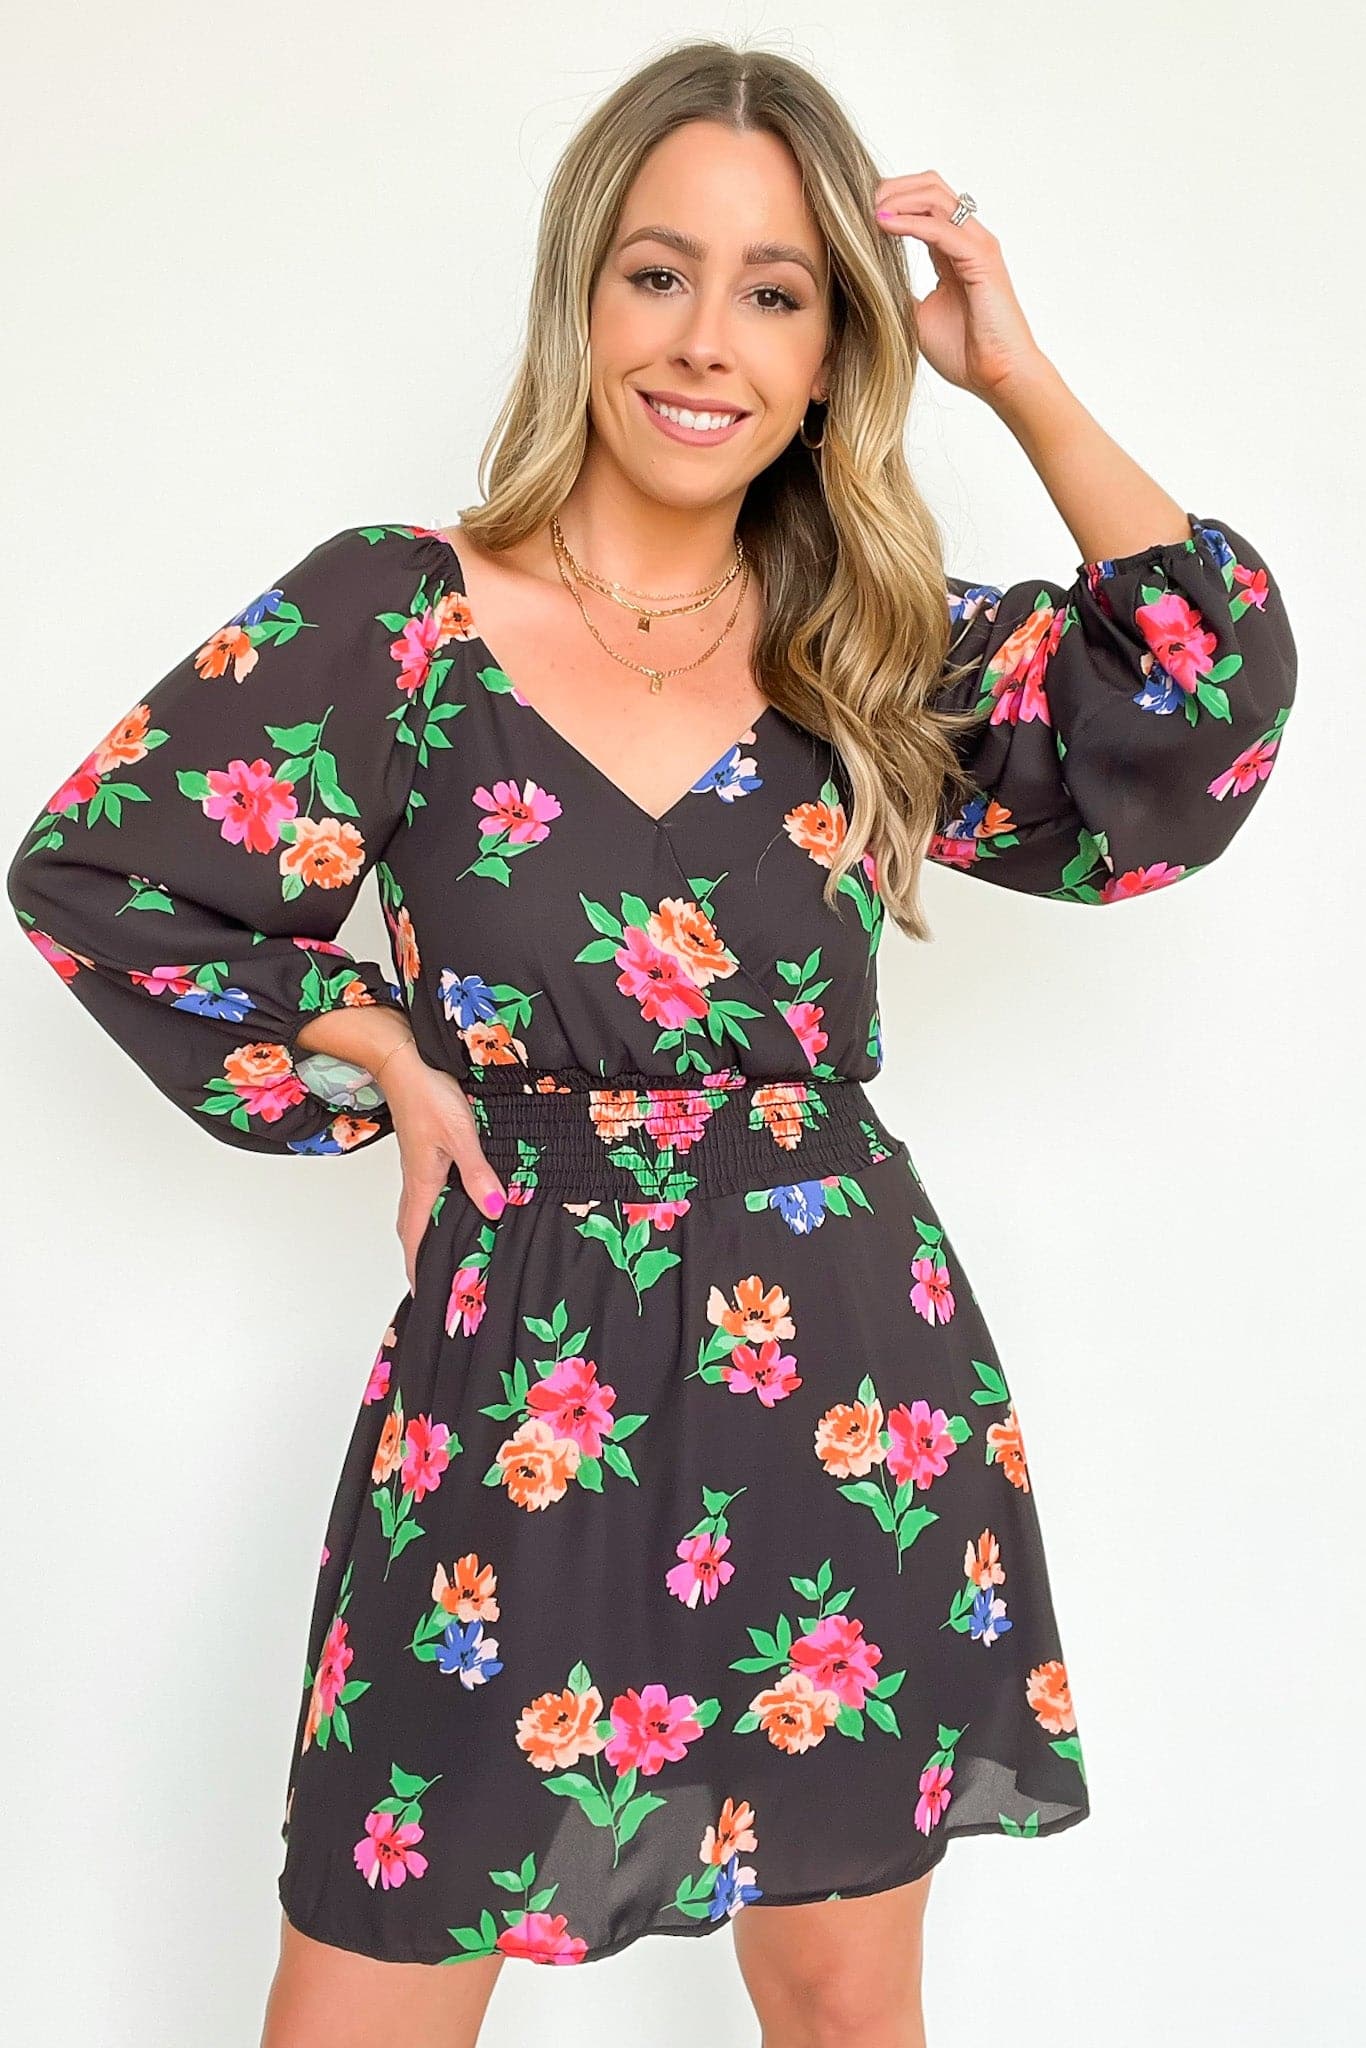  Thoroughly Sweet Floral Print Smocked Waist Dress - FINAL SALE - Madison and Mallory